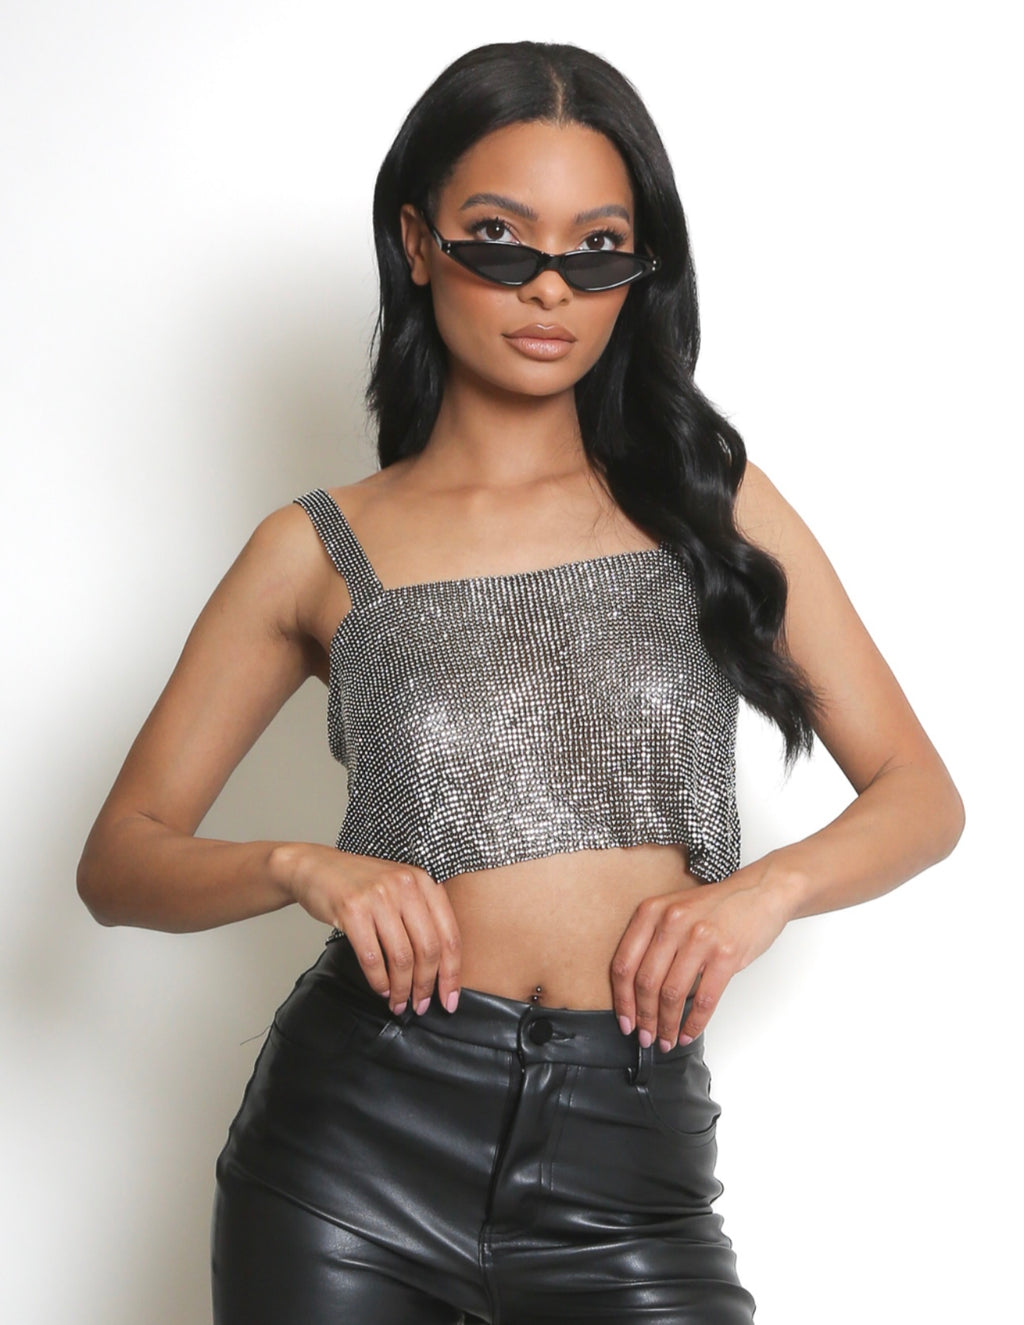 Chain mail shimmer top.